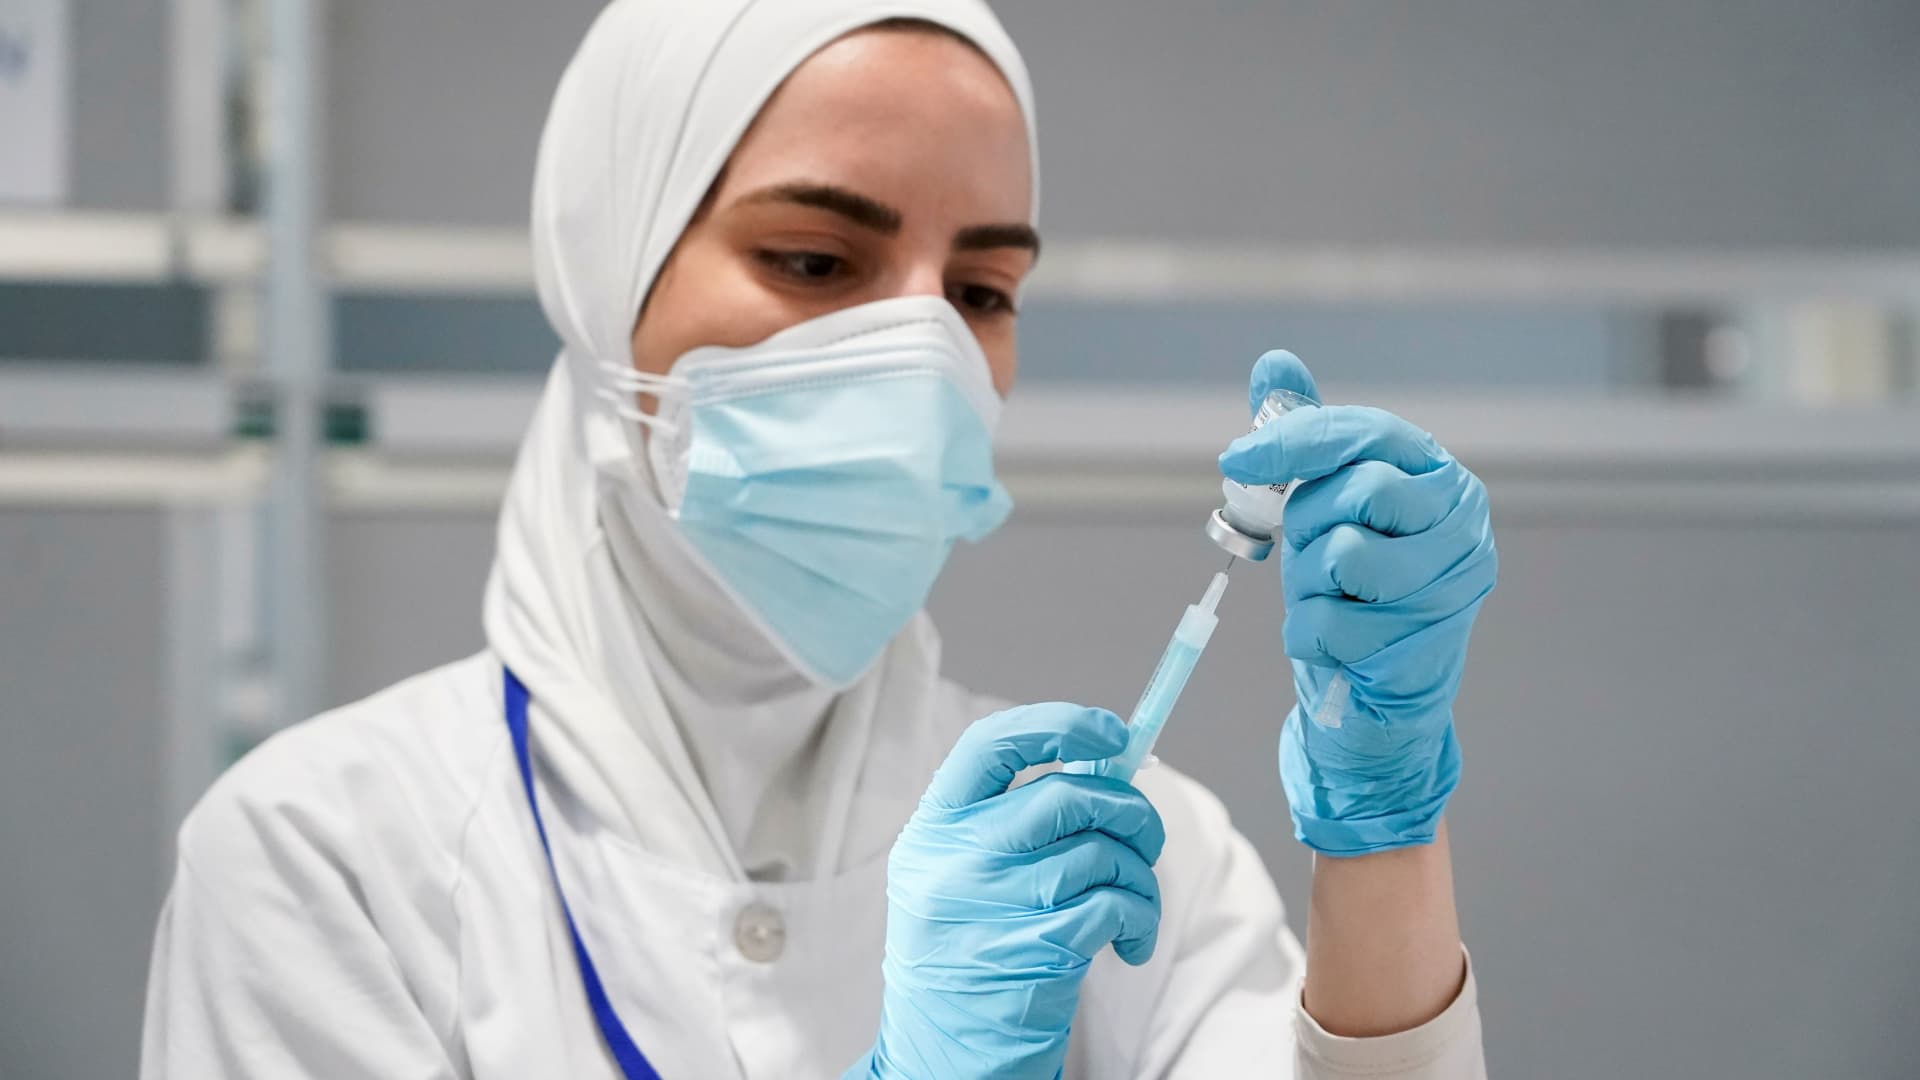 A nurse prepares a syringe with a dose of the Moderna coronavirus disease (COVID-19) vaccine at Enfermera Isabel Zendal hospital in Madrid, Spain, July 23, 2021.